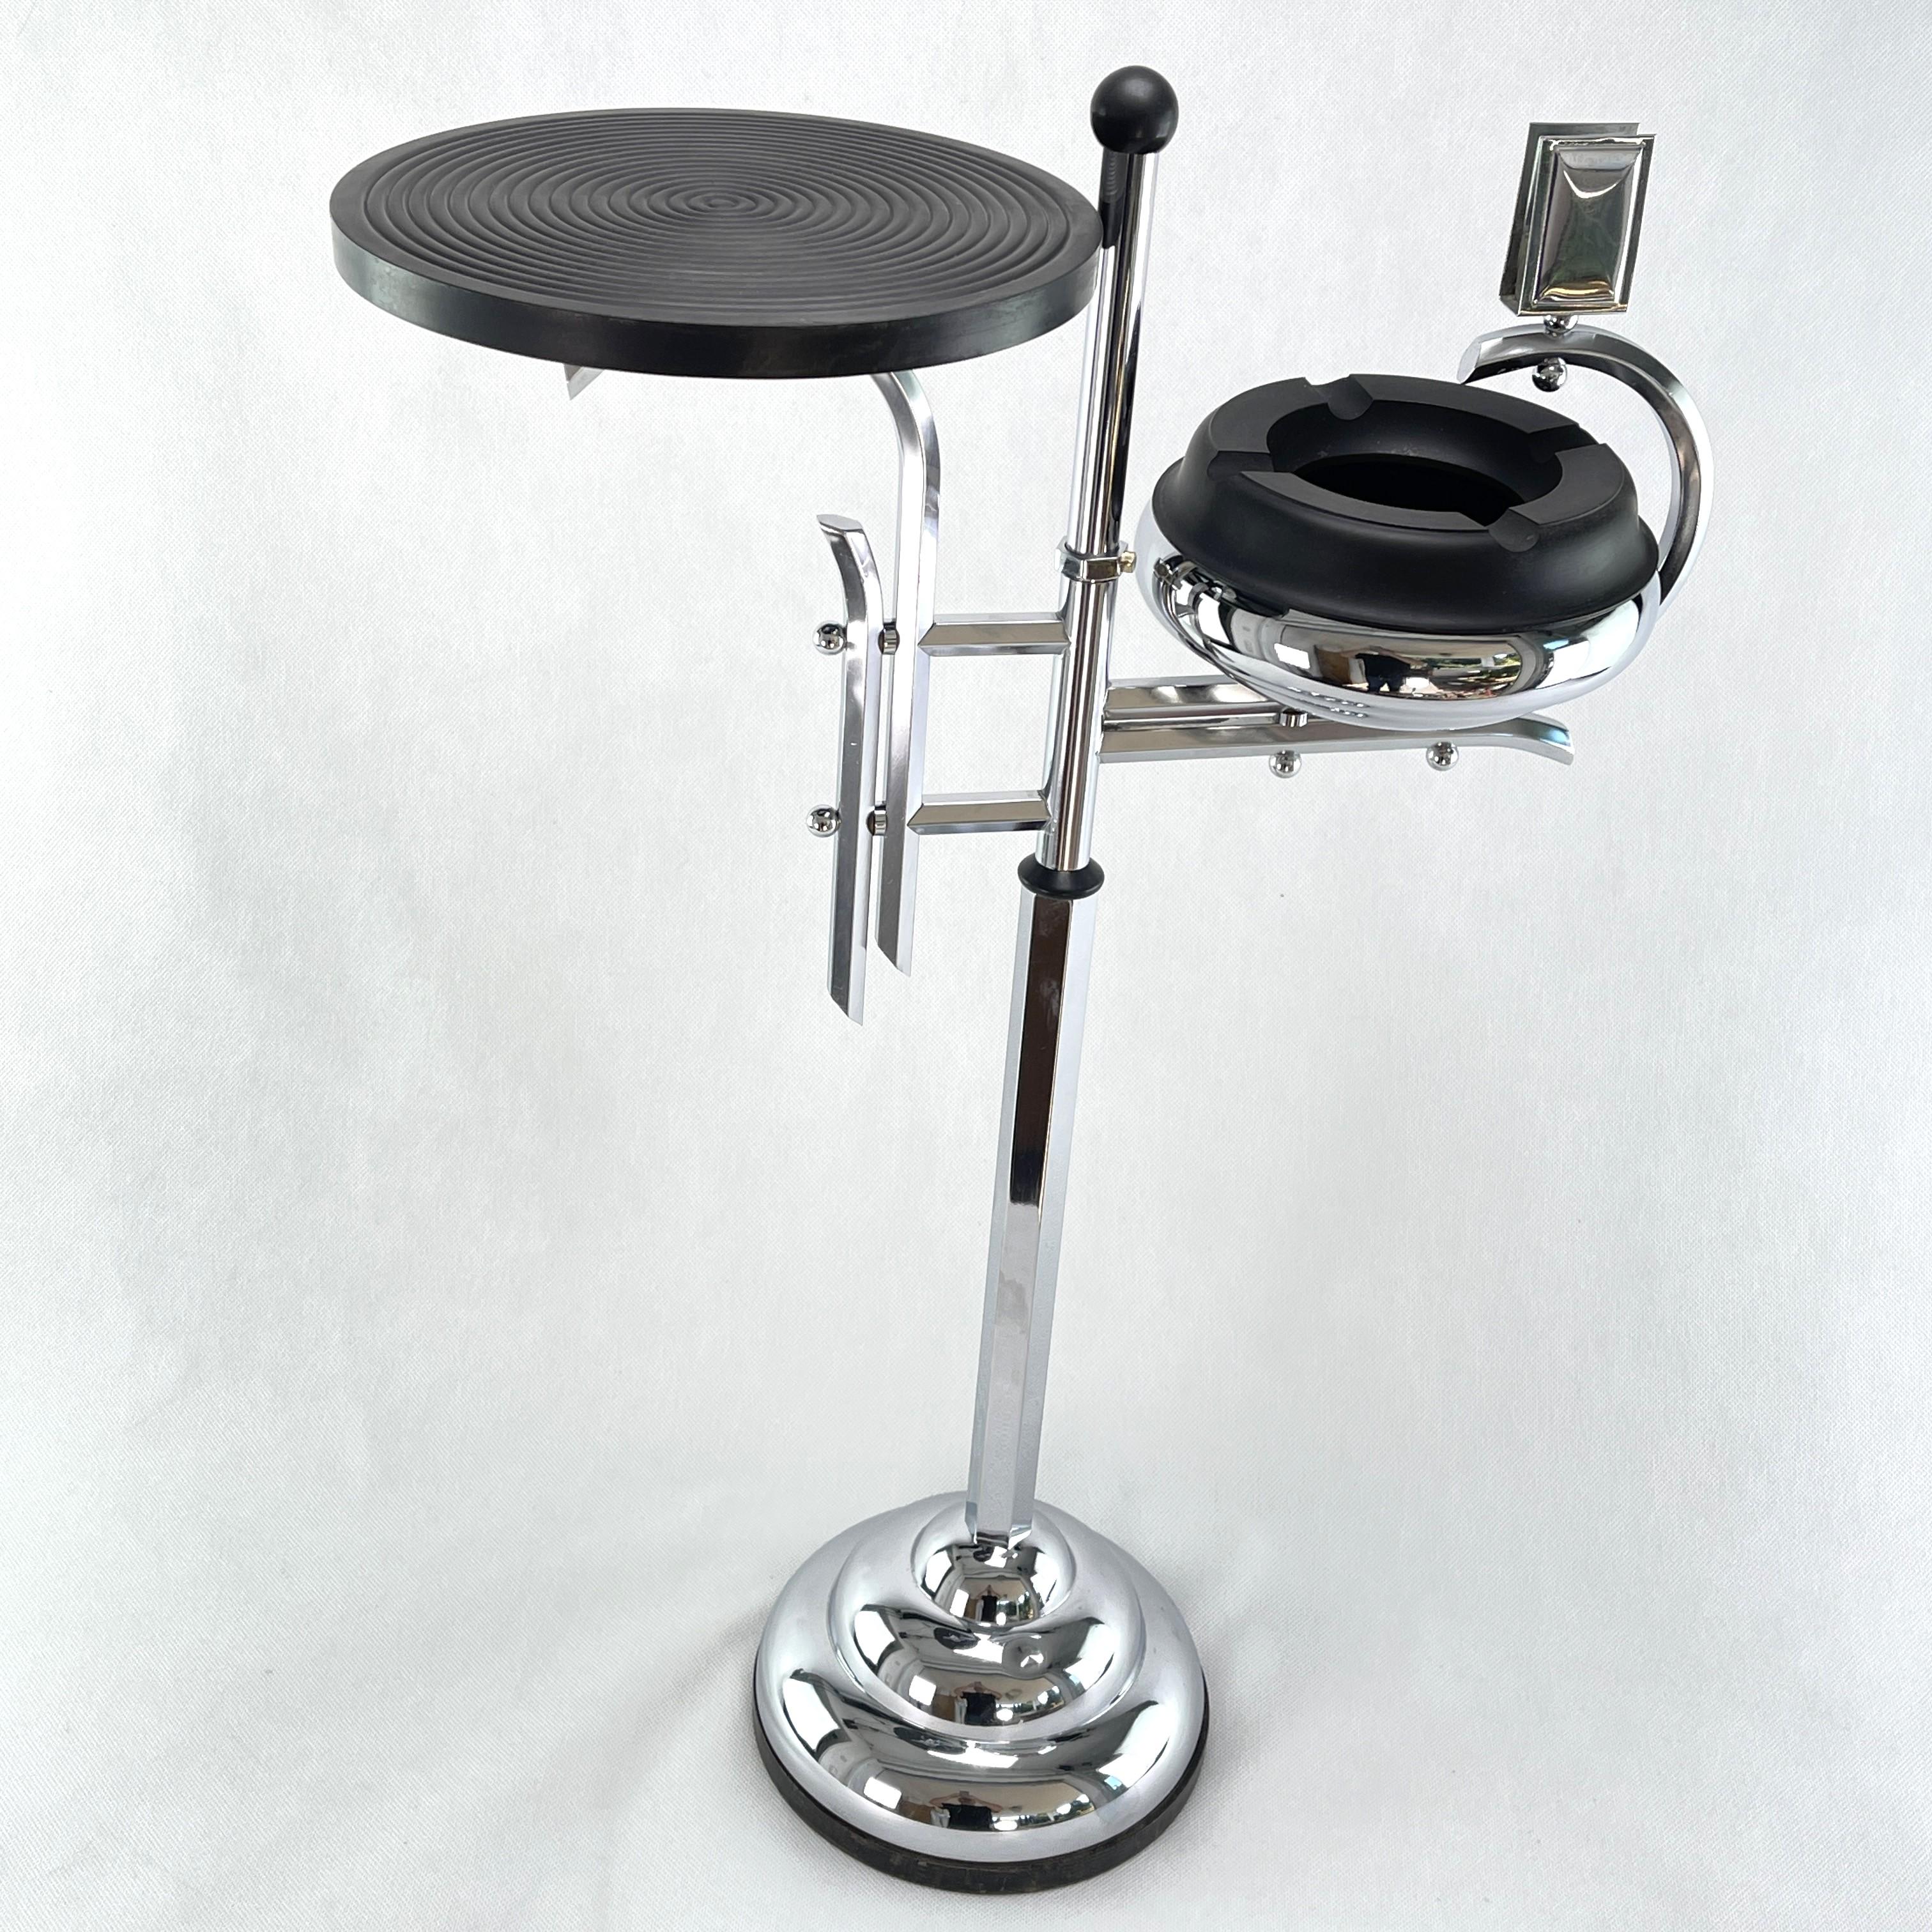 Art Deco ashtray stand

This beautiful and rare Art Deco Ashtray Stand from the 30s/40s is in the streamline modern art deco style. The designer of this extraordinary object has succeeded in combining functionality, design, style and aesthetics.